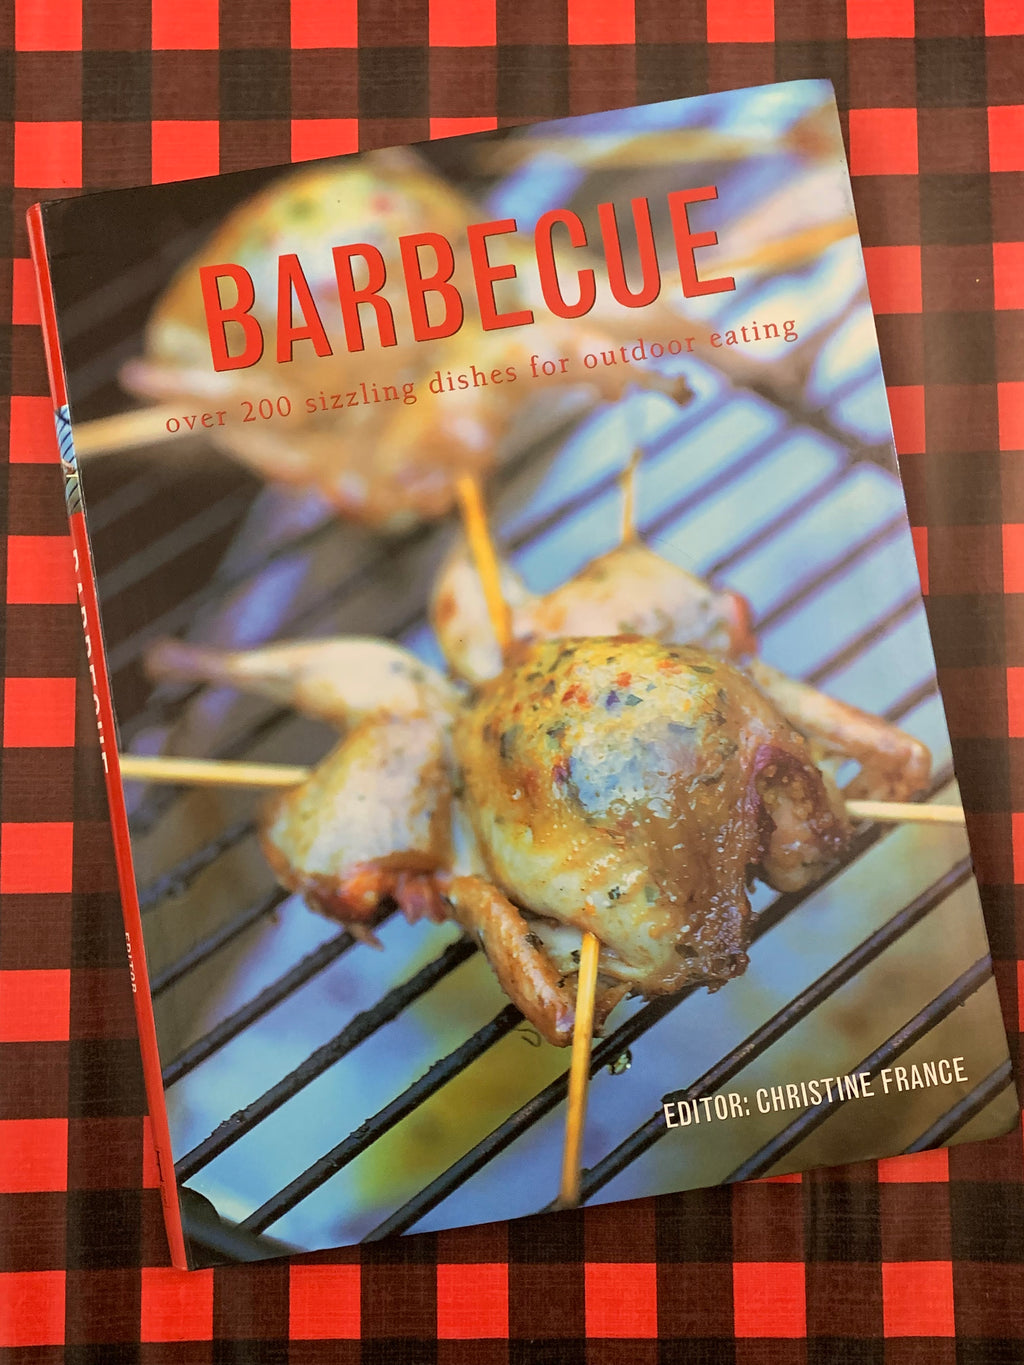 Barbecue: over 200 sizzling dishes for outdoor eating- By Christine France